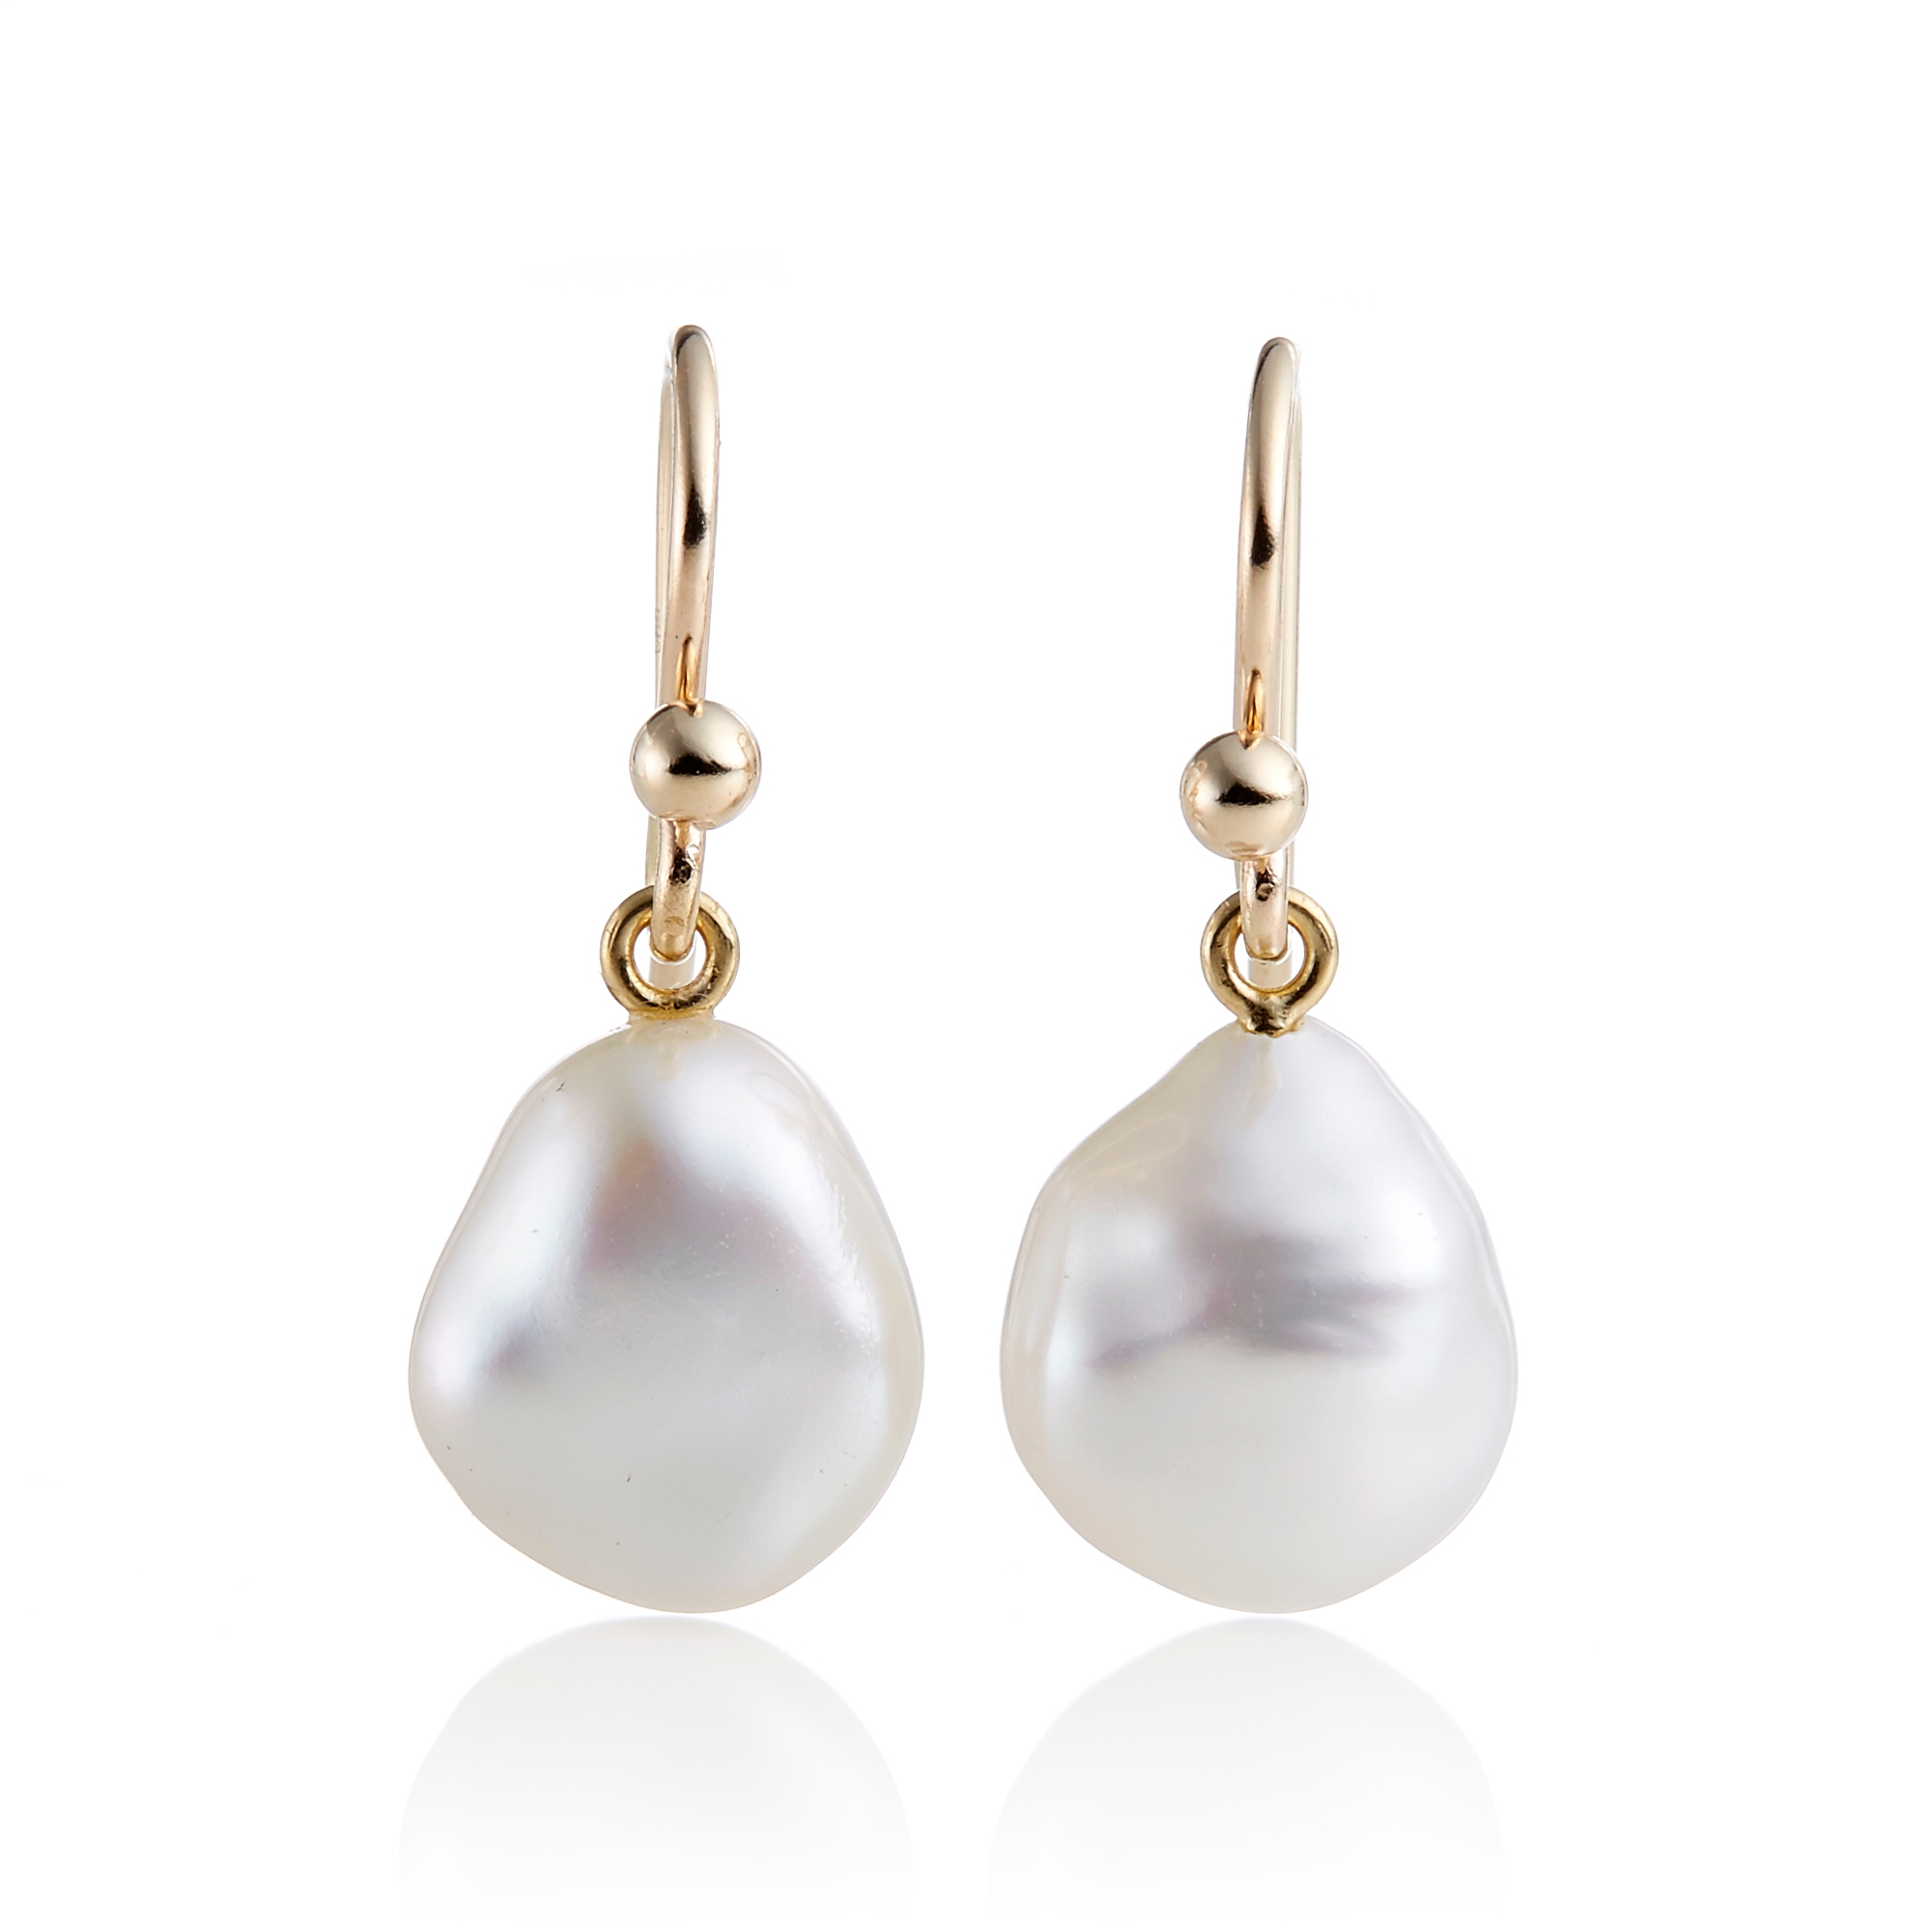 Gump's Small White Baroque Pearl Drop Earrings | Gump's